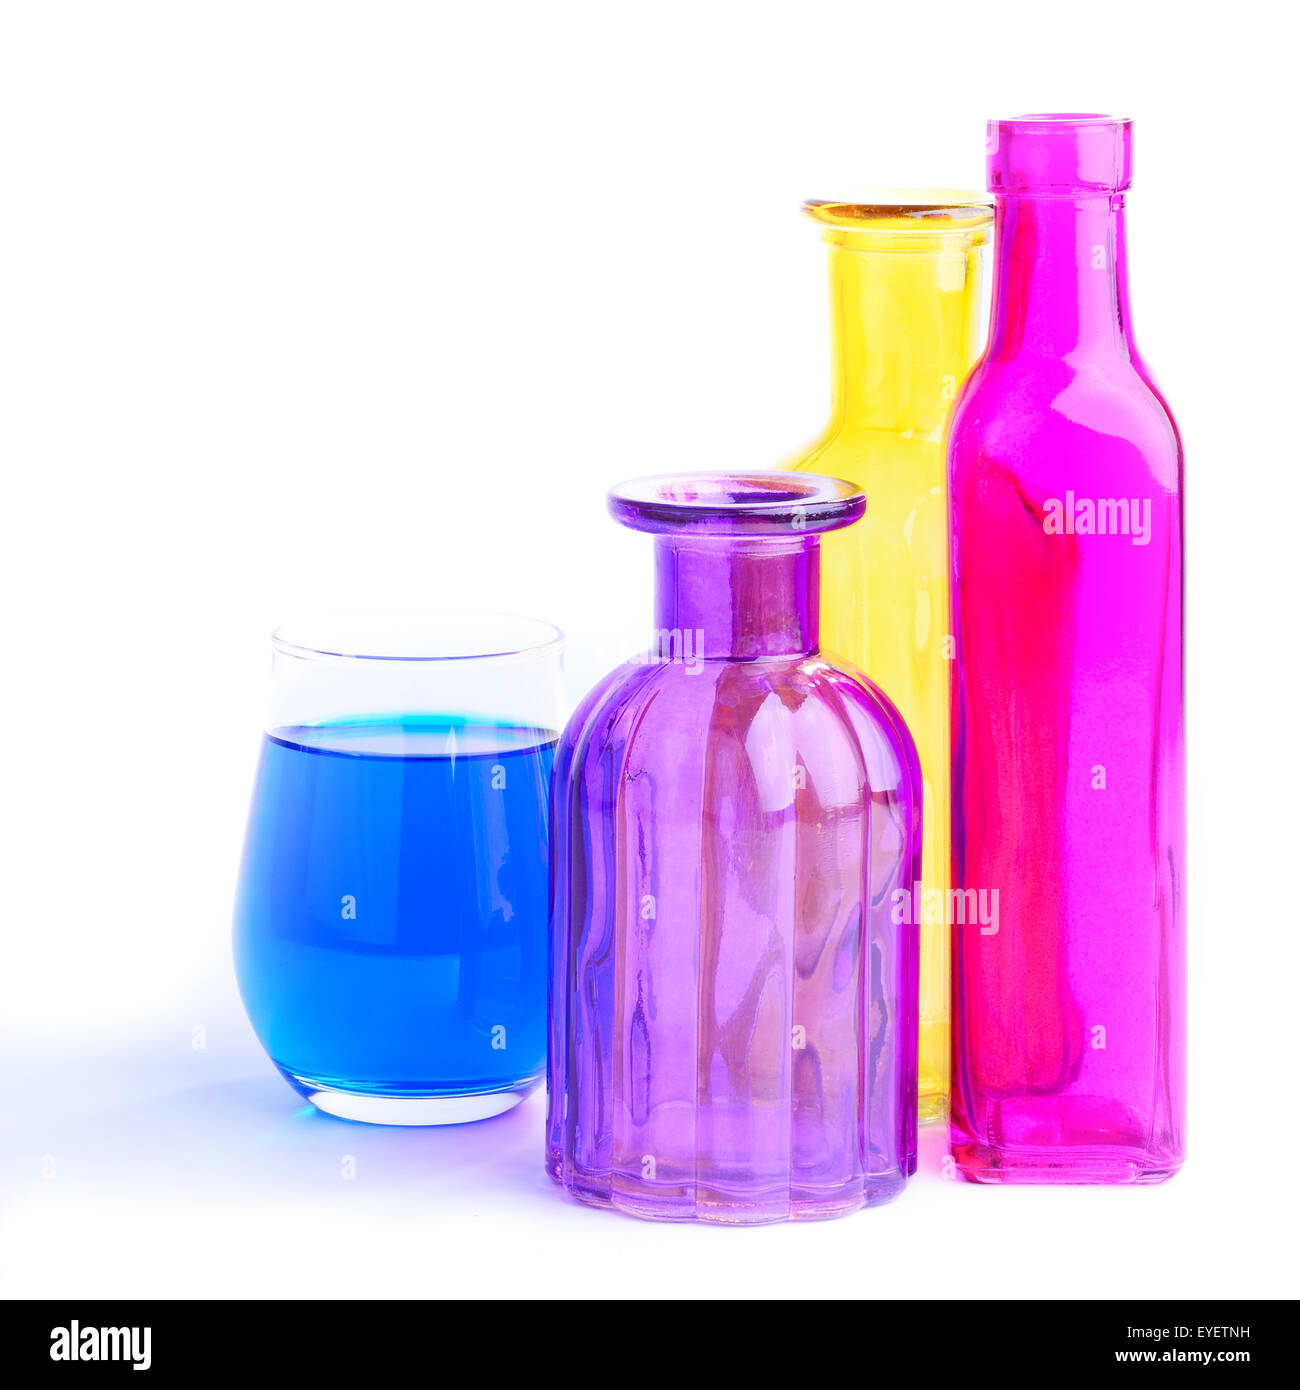 Three colorful bottles and one glass, isolated on white background Stock Photo